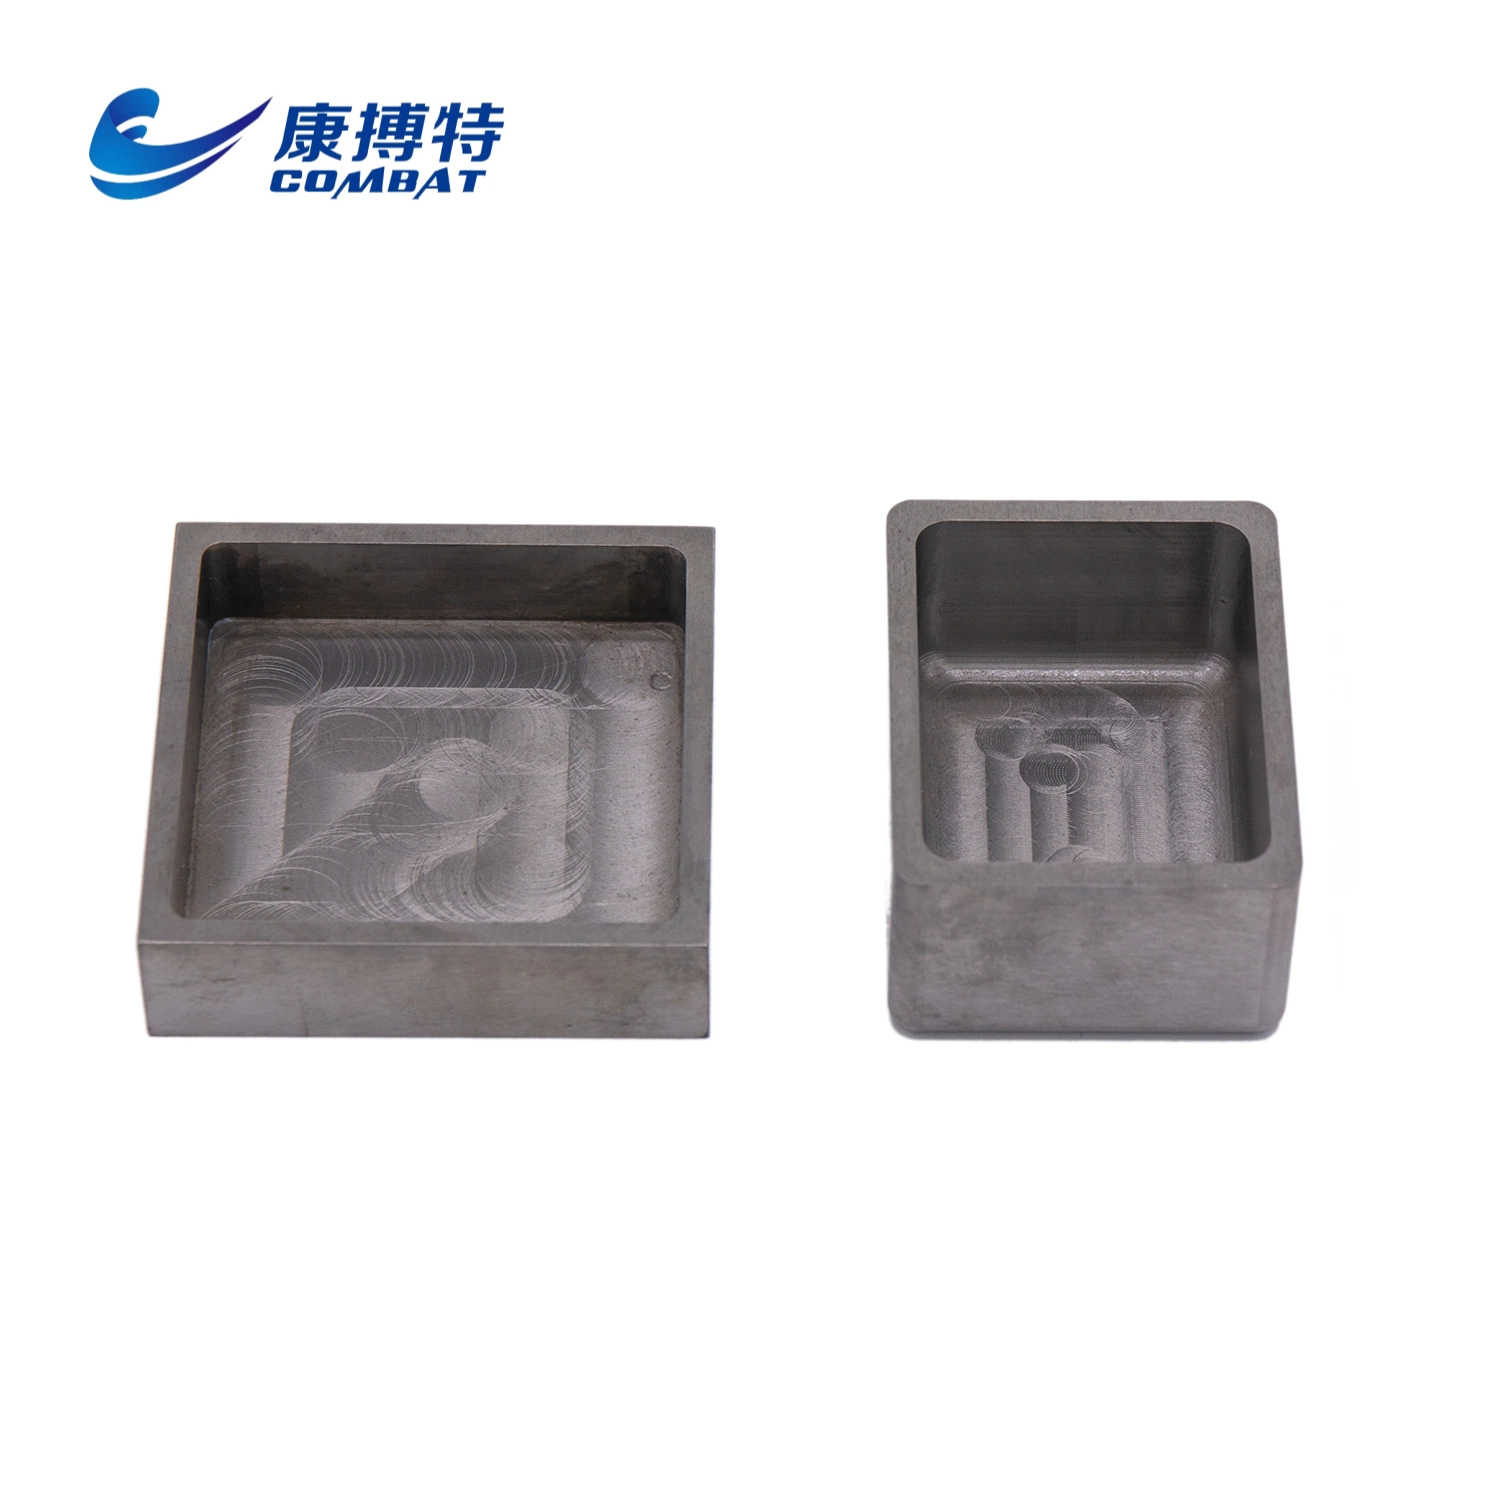 Tungsten Alloy or Pure Tungsten (Plate, Tube, Bar, Wire, Boat, Parts)